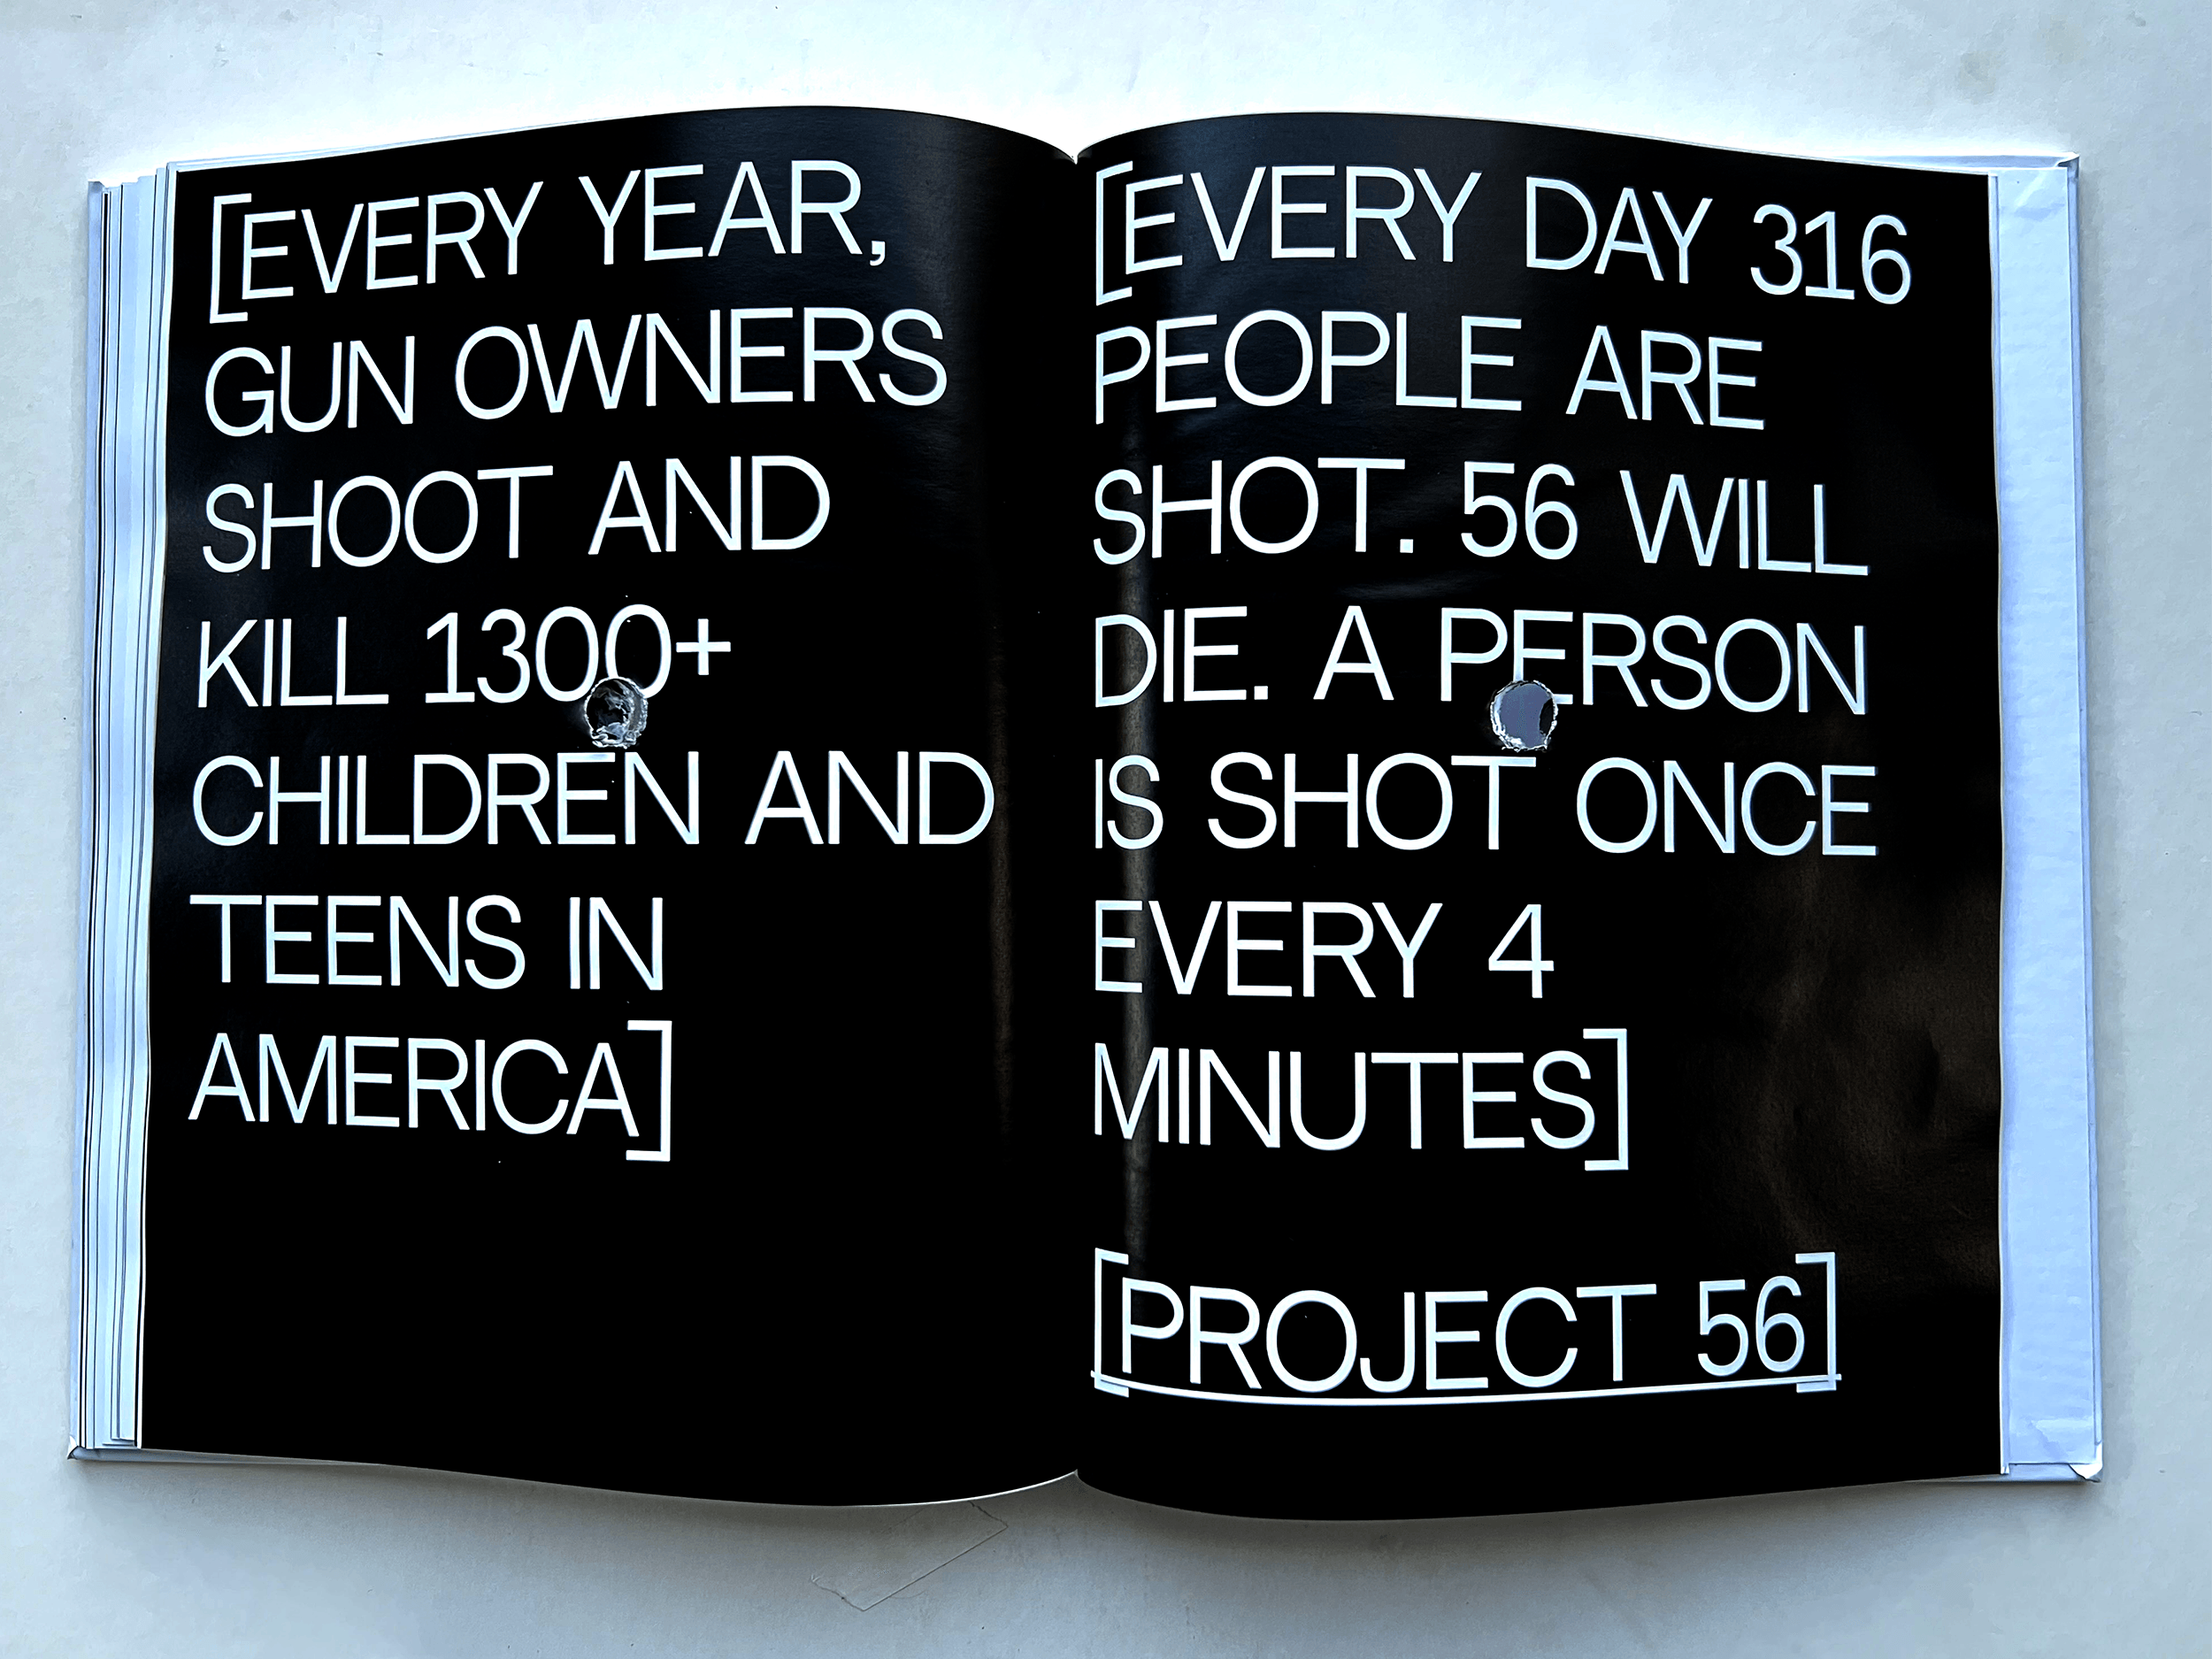 [ Project 56 ] is a book detailing the gun violence epidemic through 911 transcripts